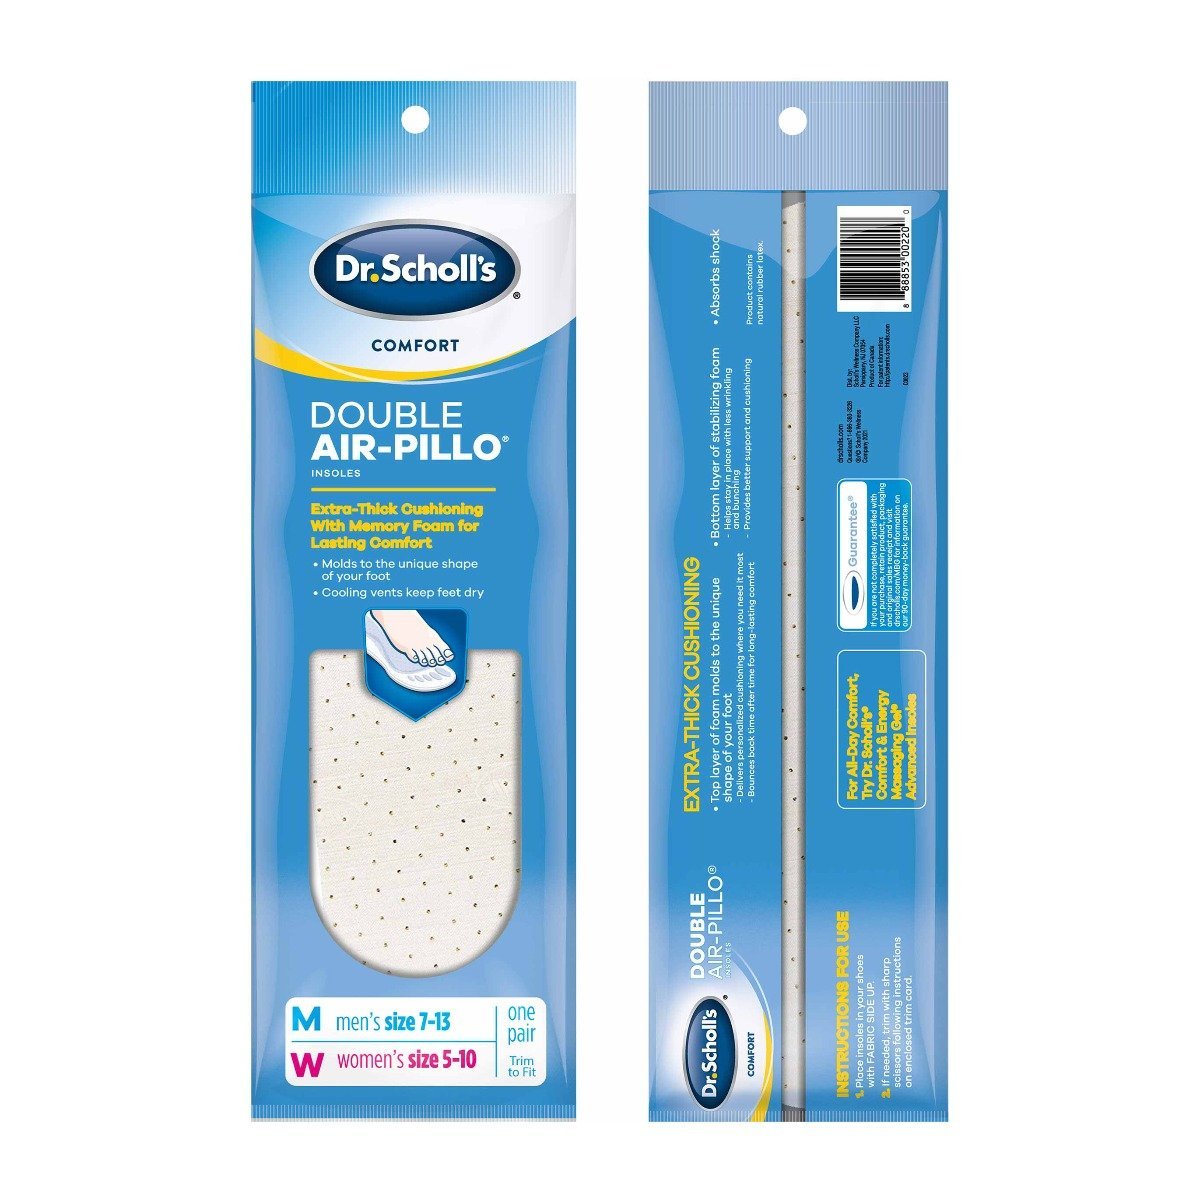 Dr. Scholl’s Comfort Double-Air Pillo Insoles Cushioning Men Size (7-13) & Women Size (5-10) - 1 Pair - Bloom Pharmacy